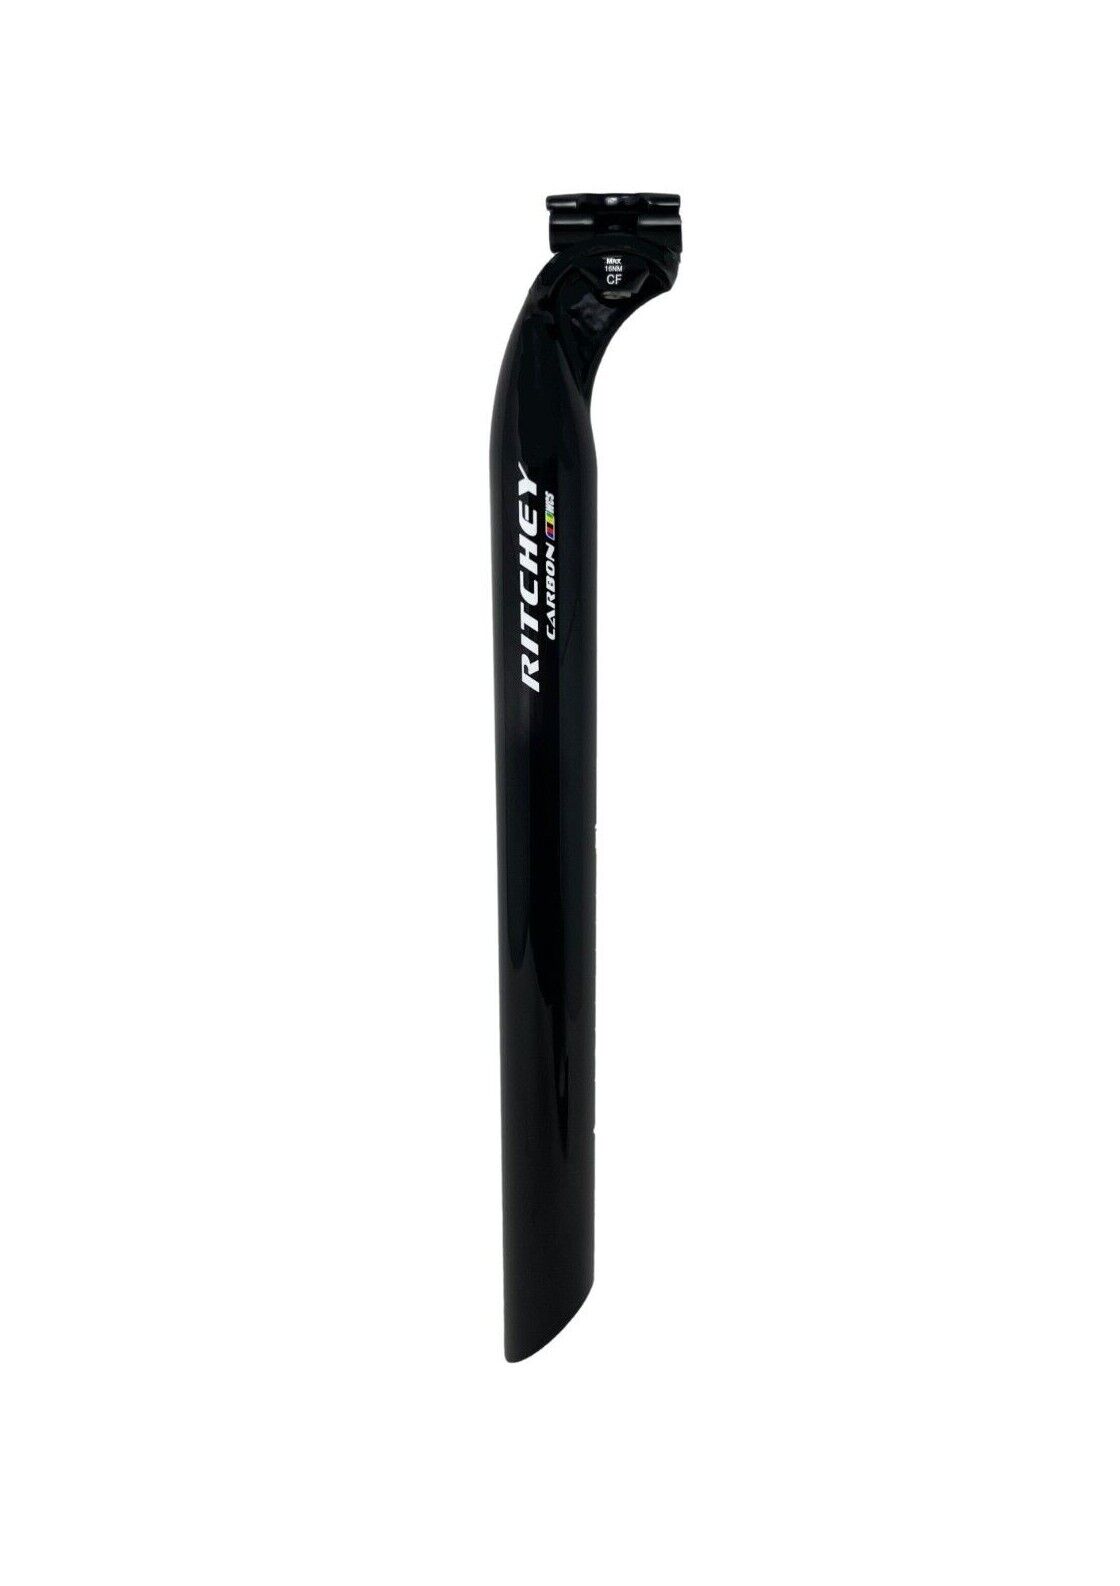 Ritchey WCS Carbon Seatpost - 34.9mm - 400mm - 25mm Offset - Sportandleisure.com